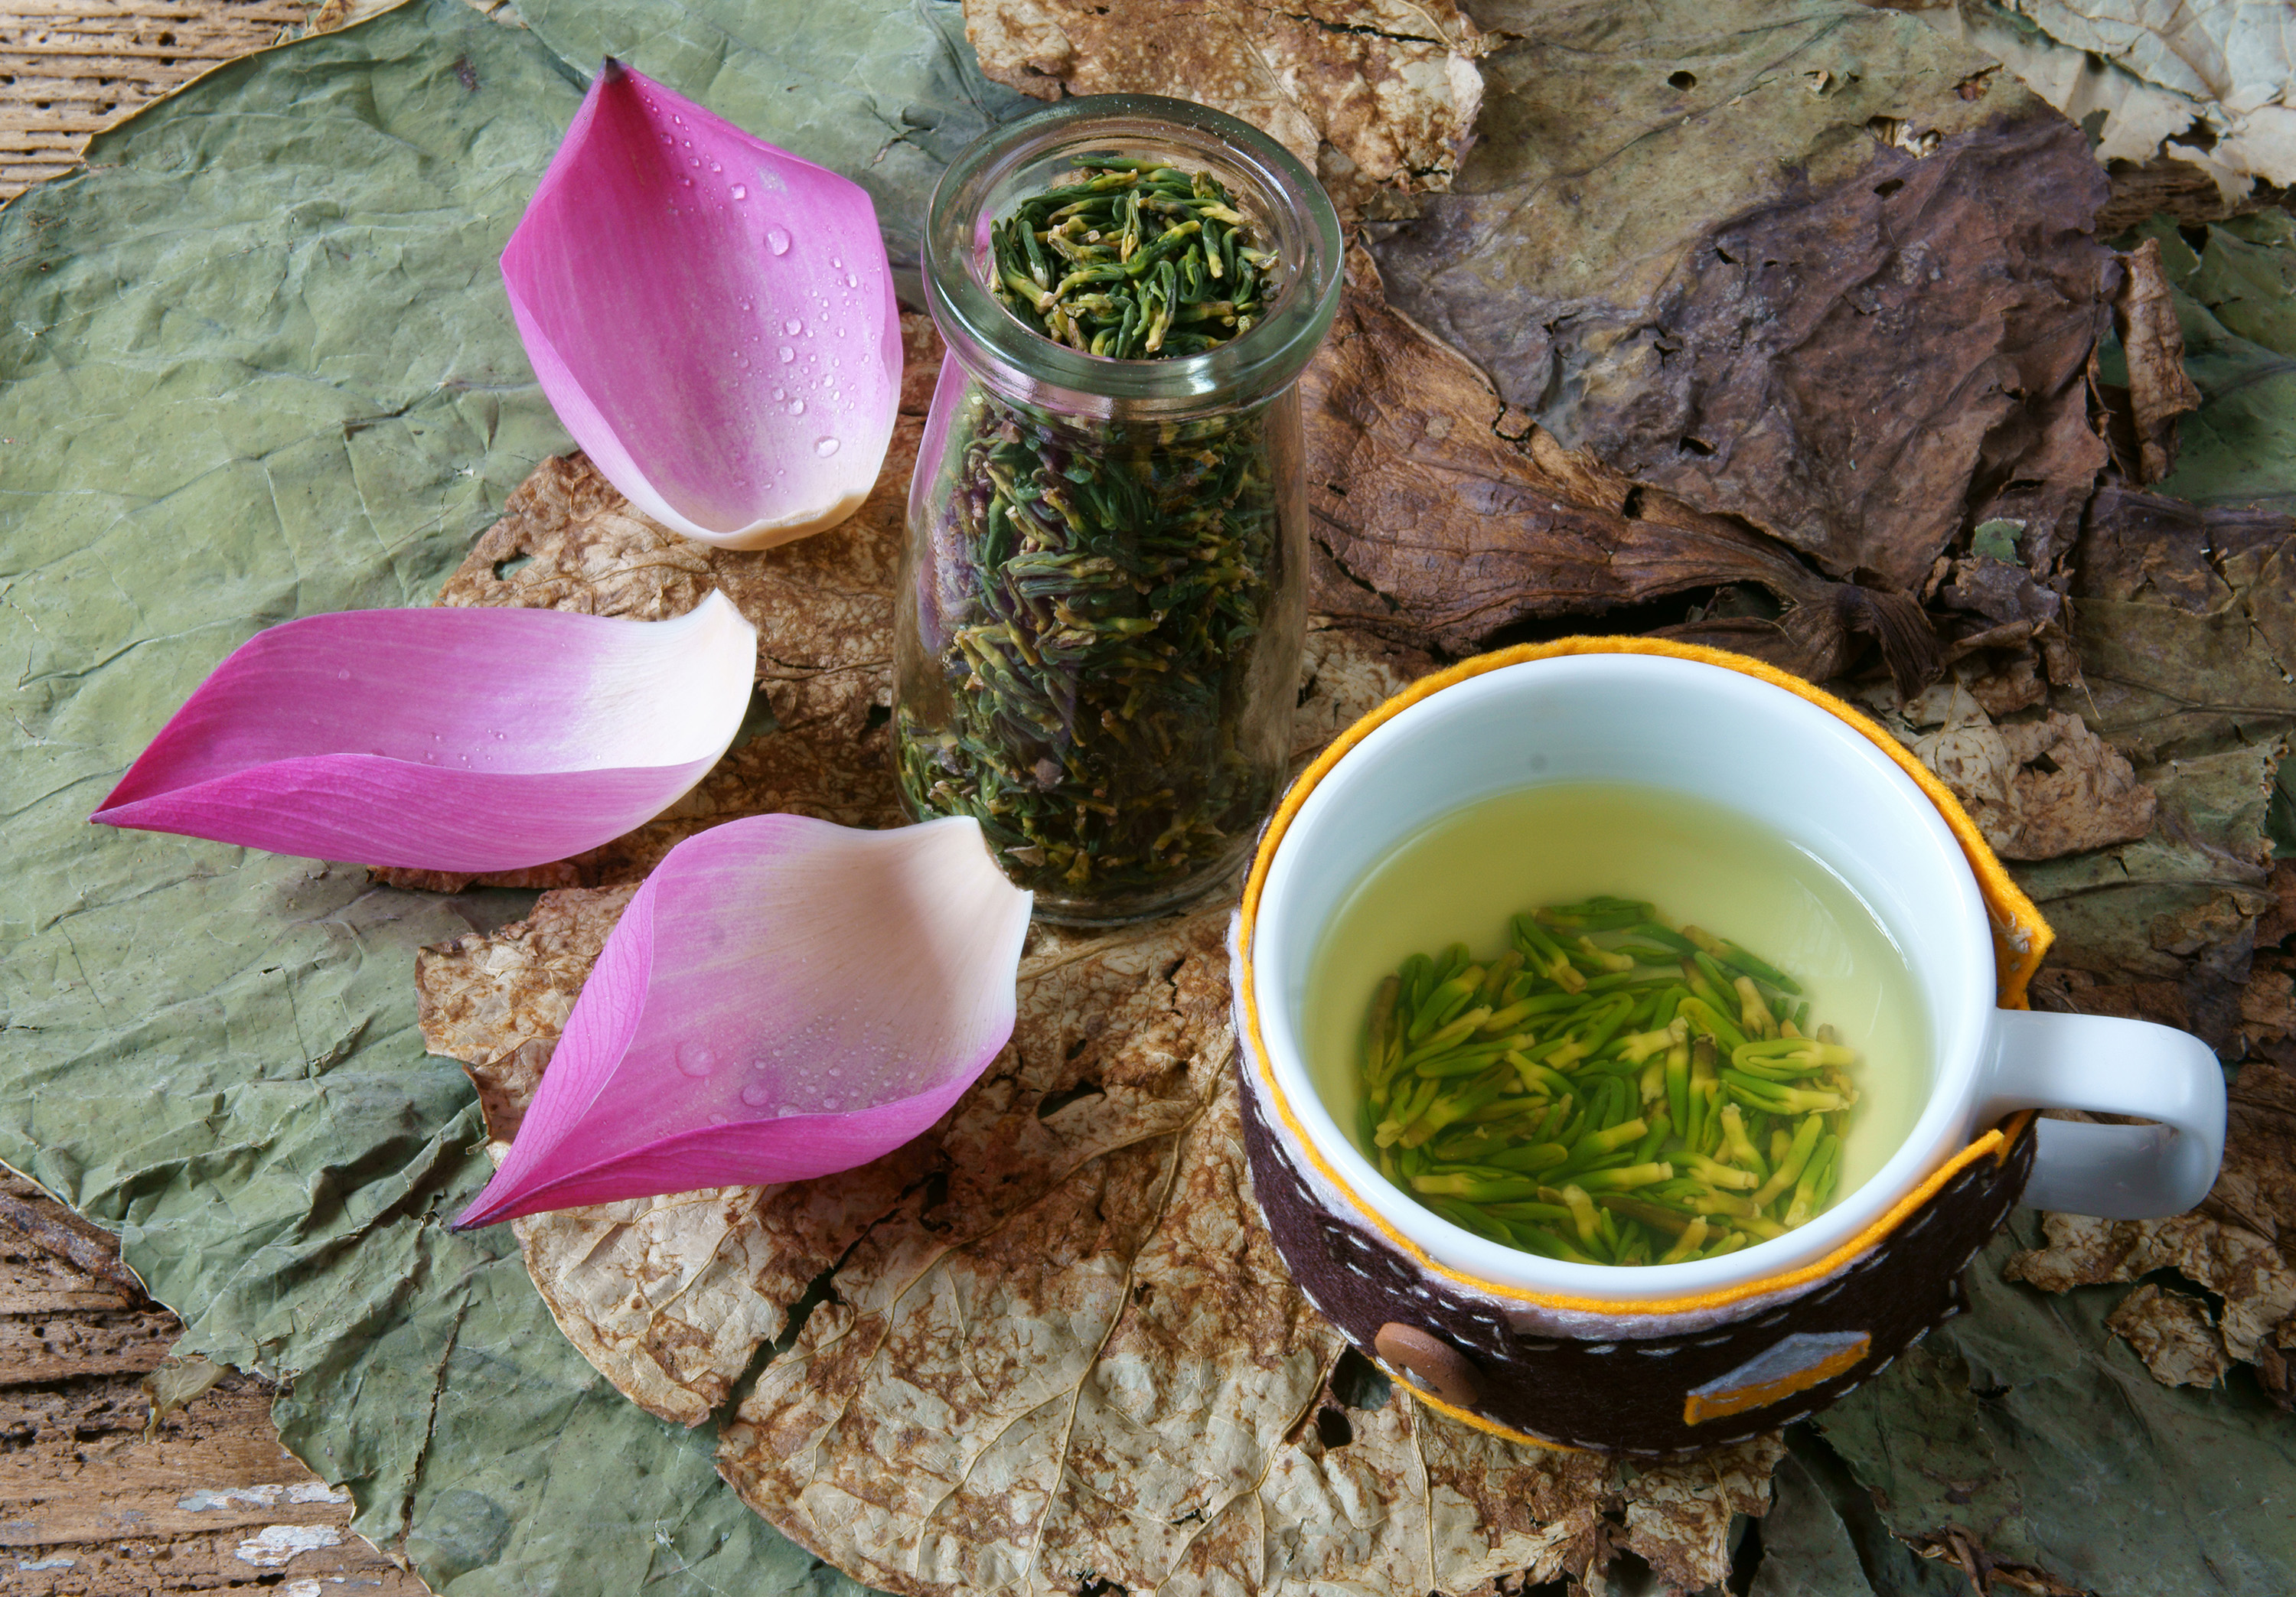 Lotus tea is in fact a combination of lotus flowers with high-quality green tea leaves